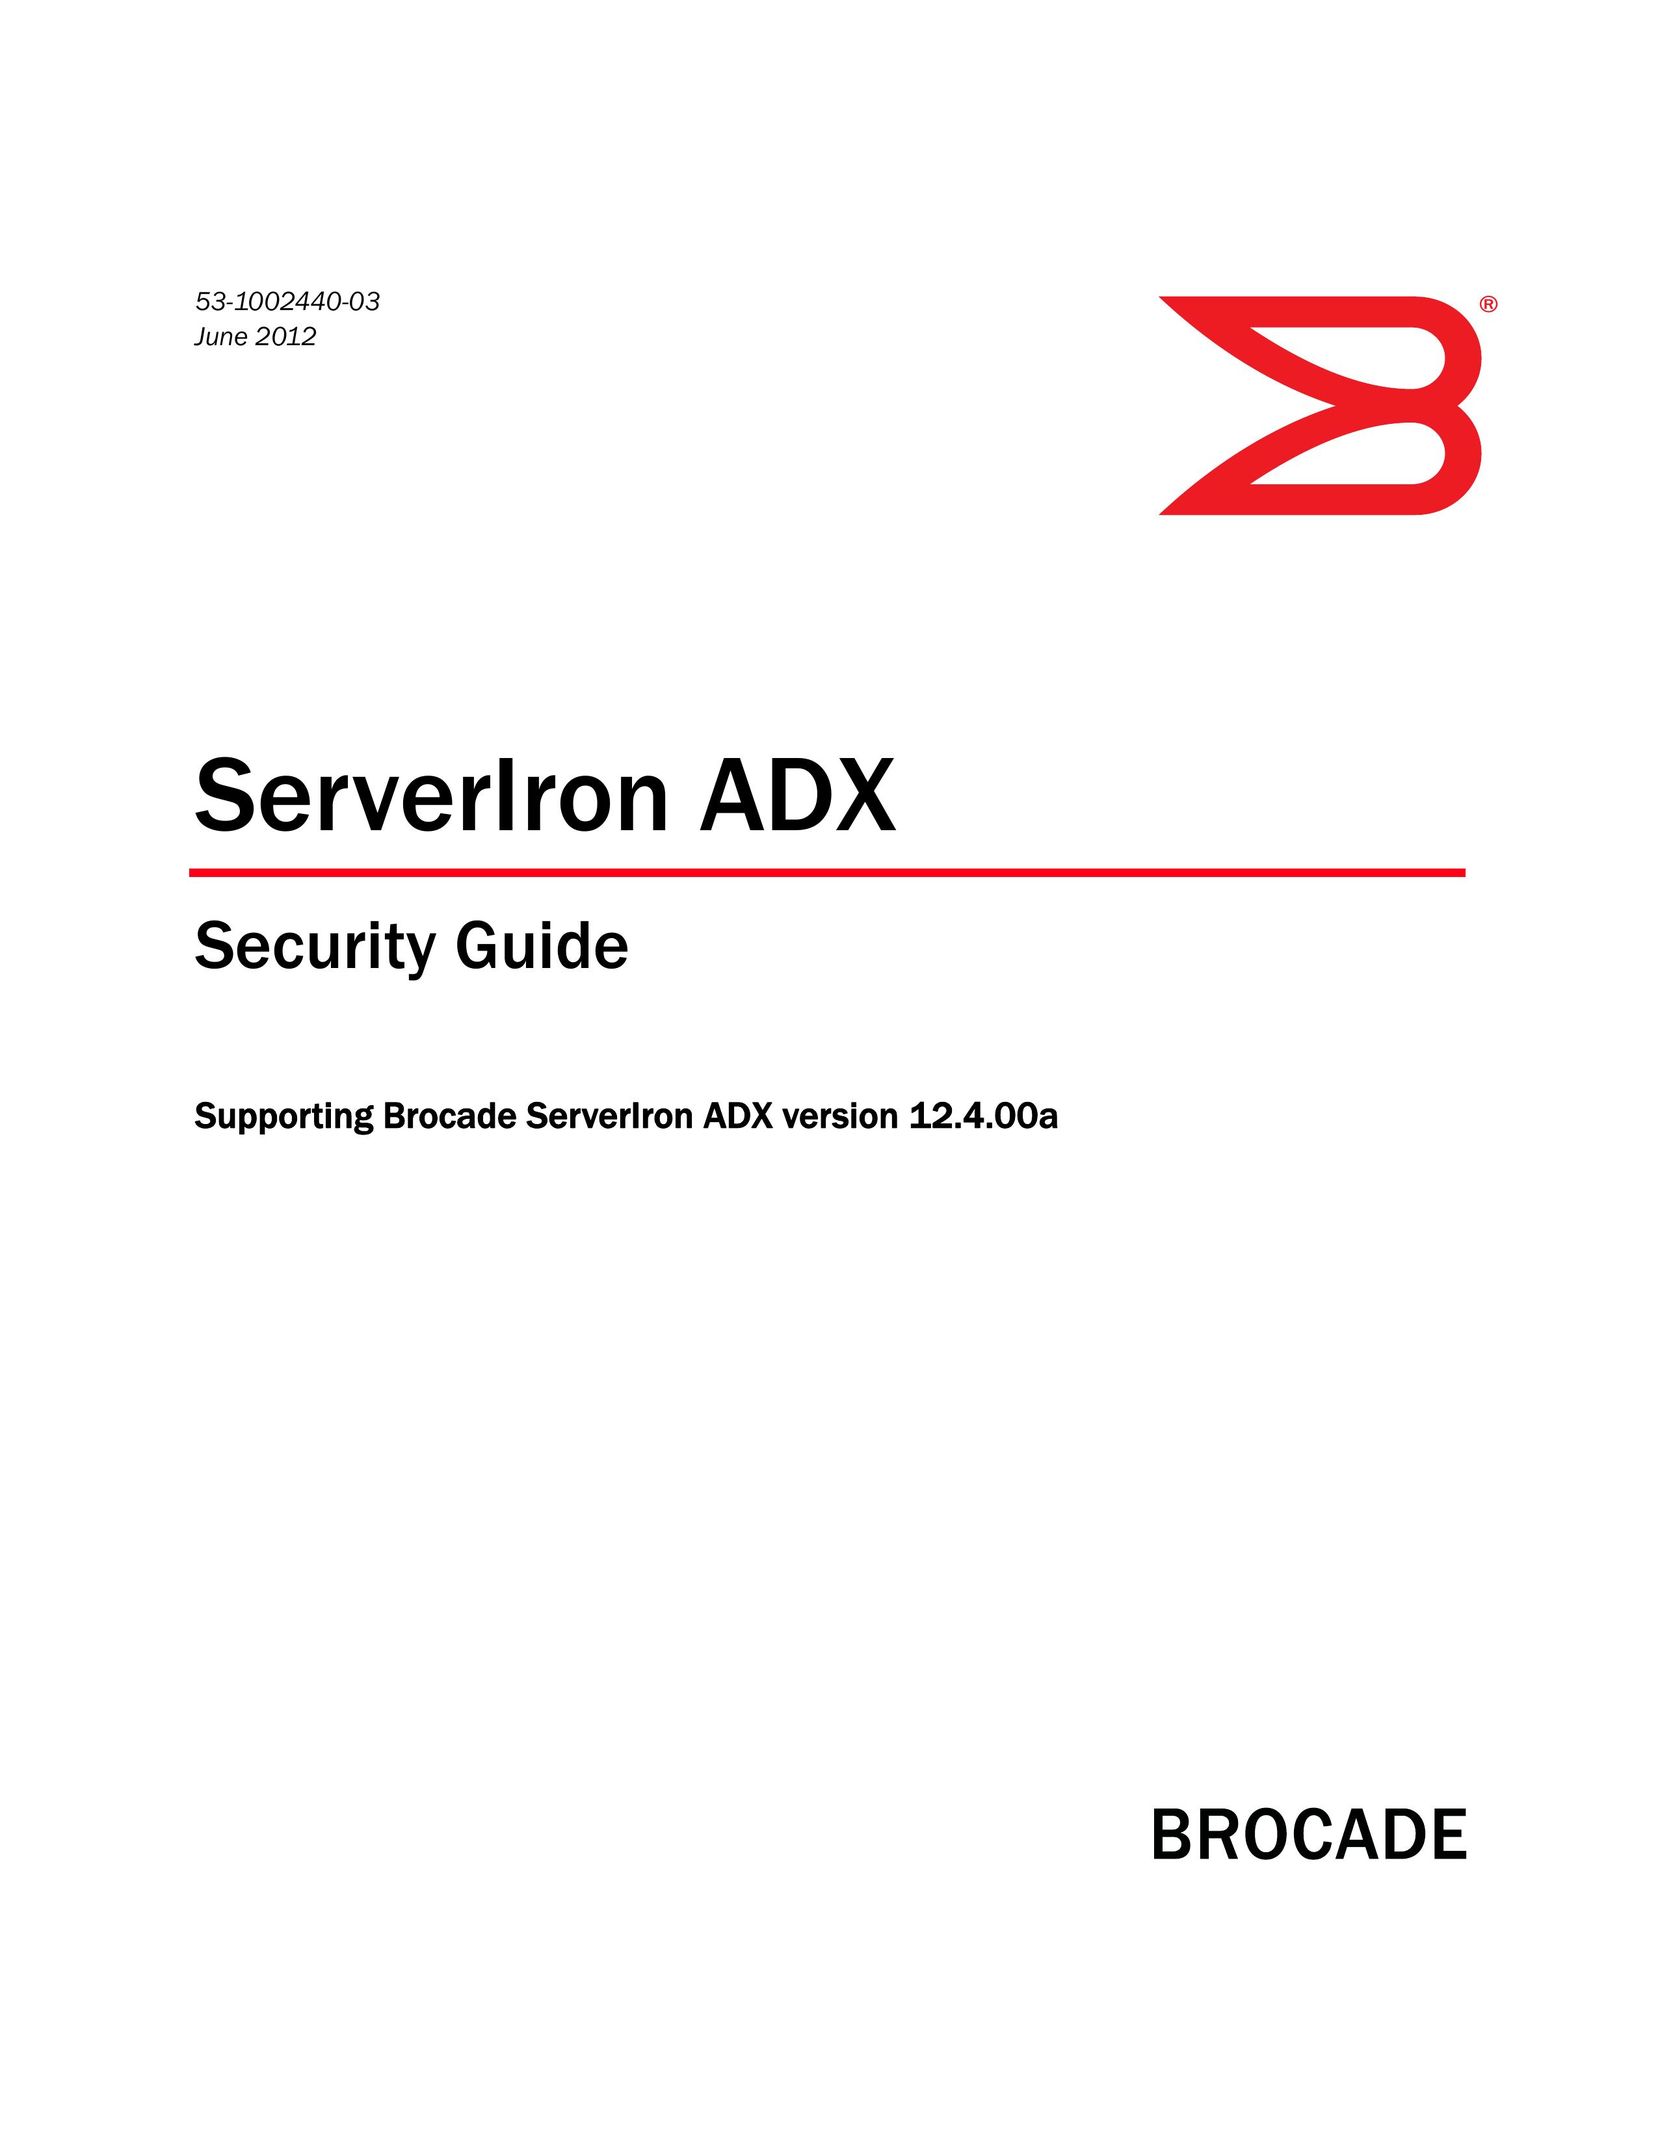 Brocade Communications Systems 12.4.00a Home Theater Server User Manual